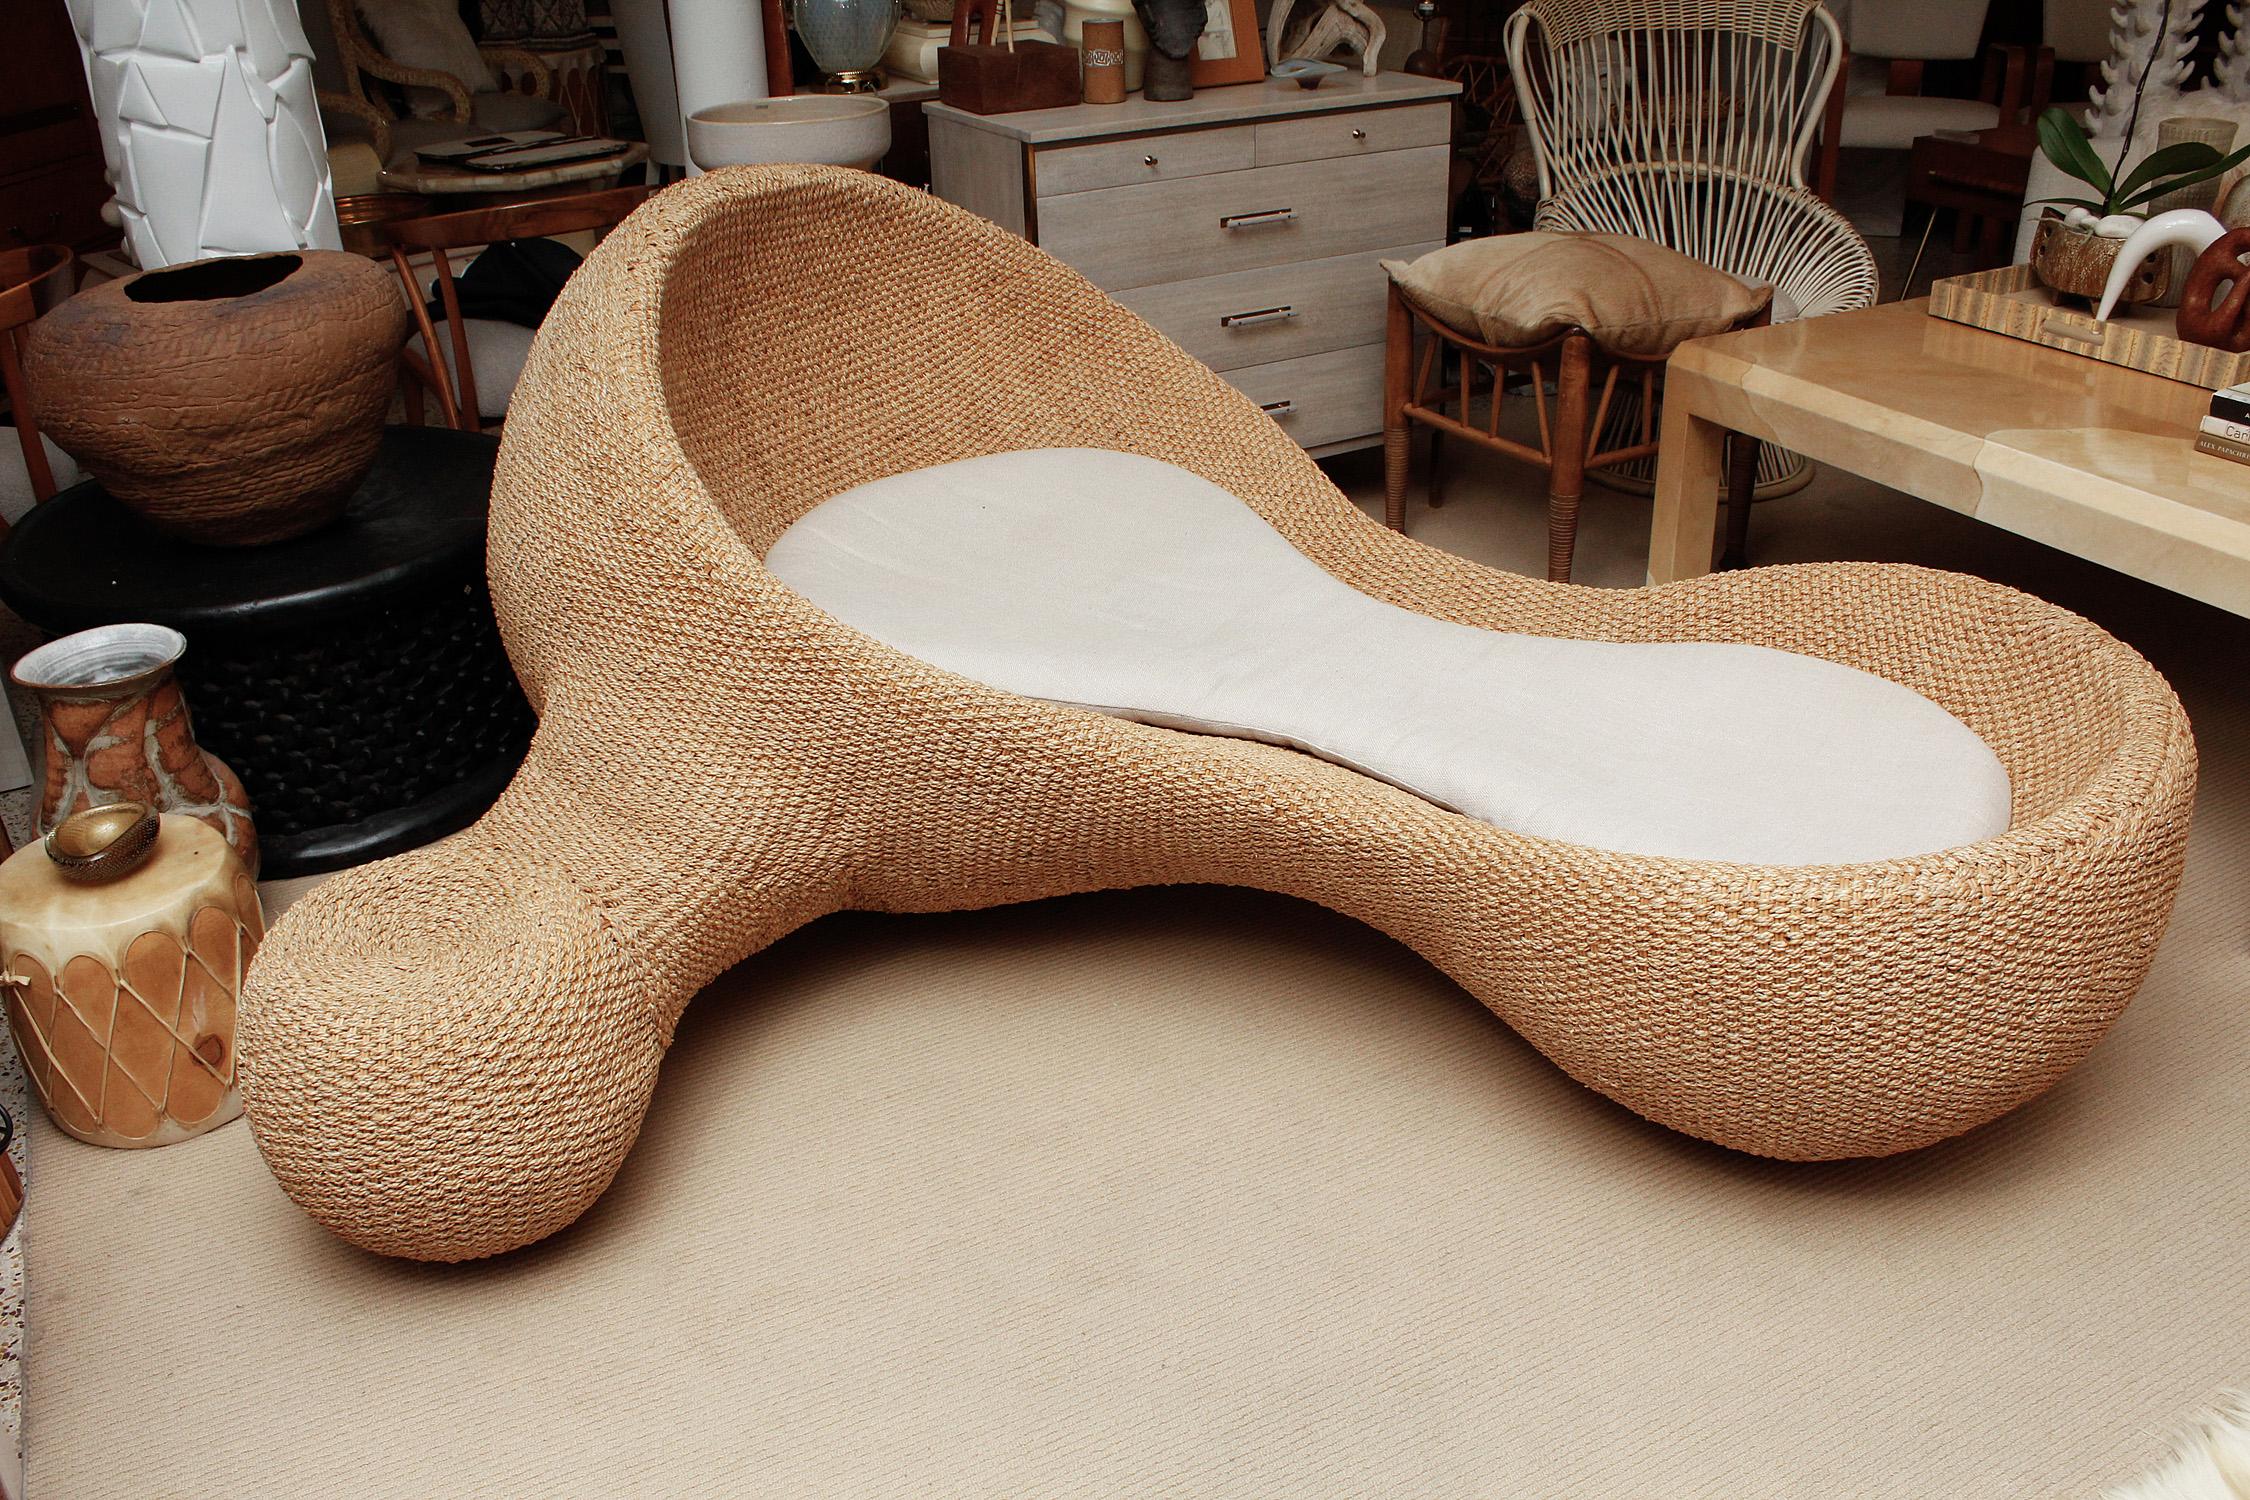 A modernist mix of futuristic form and natural materials inform the design of this generously scaled chaise longue, crafted from wicker and woven sea grass rope on a metal frame. Maker unknown. Original cushion with newer upholstery. Not recommended